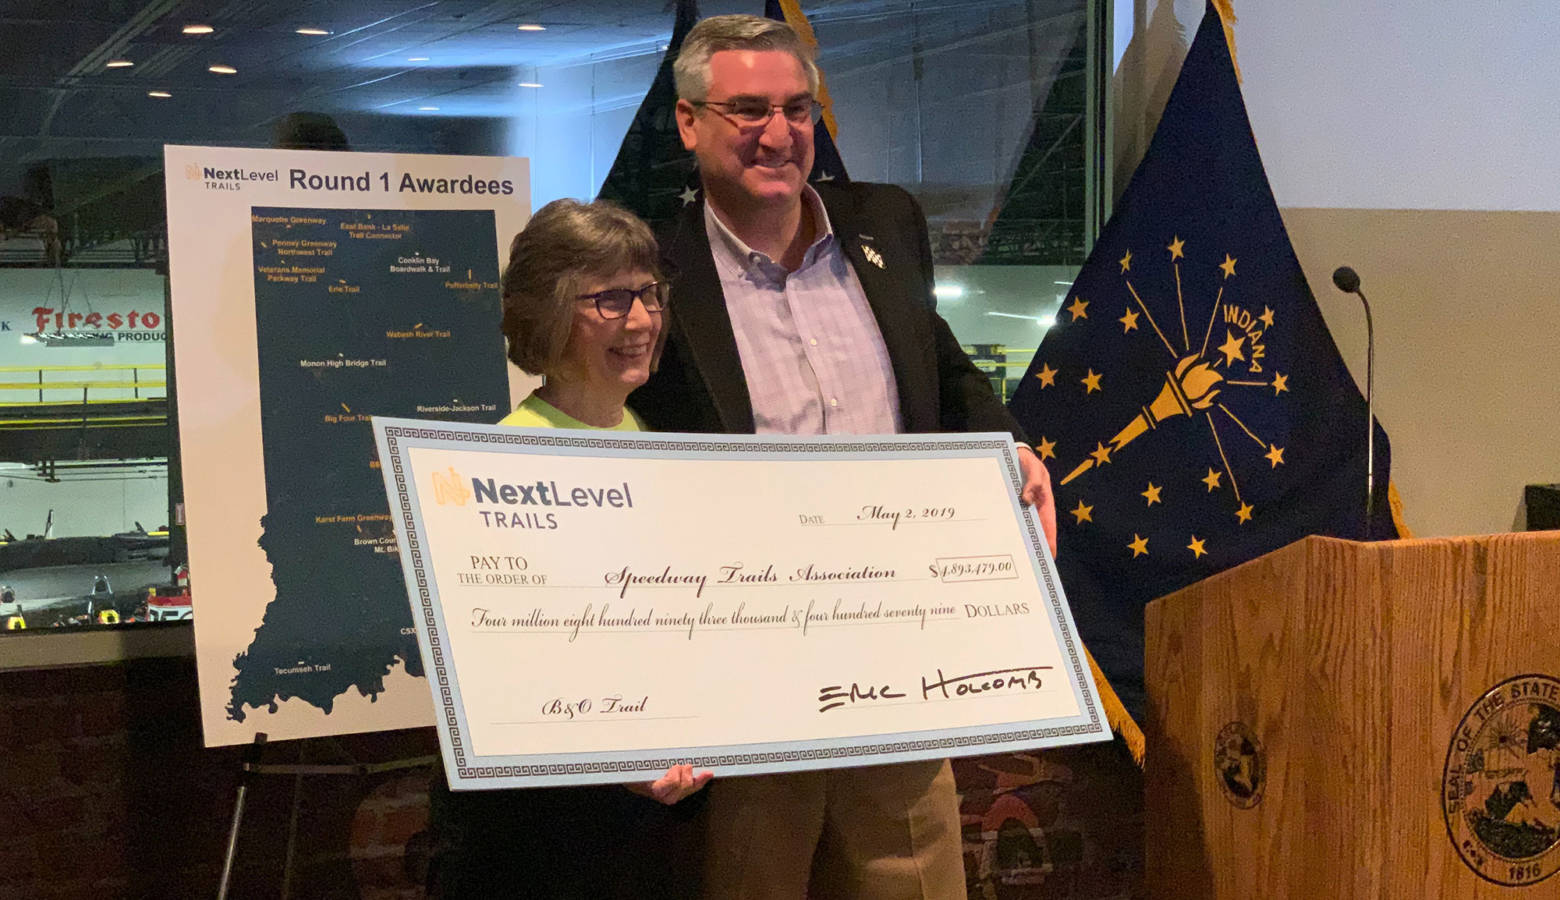 Gov. Eric Holcomb poses with the head of the Speedway Trails Association, which received the single largest award from the first round of the Next Level Trails program. (Brandon Smith/IPB News)